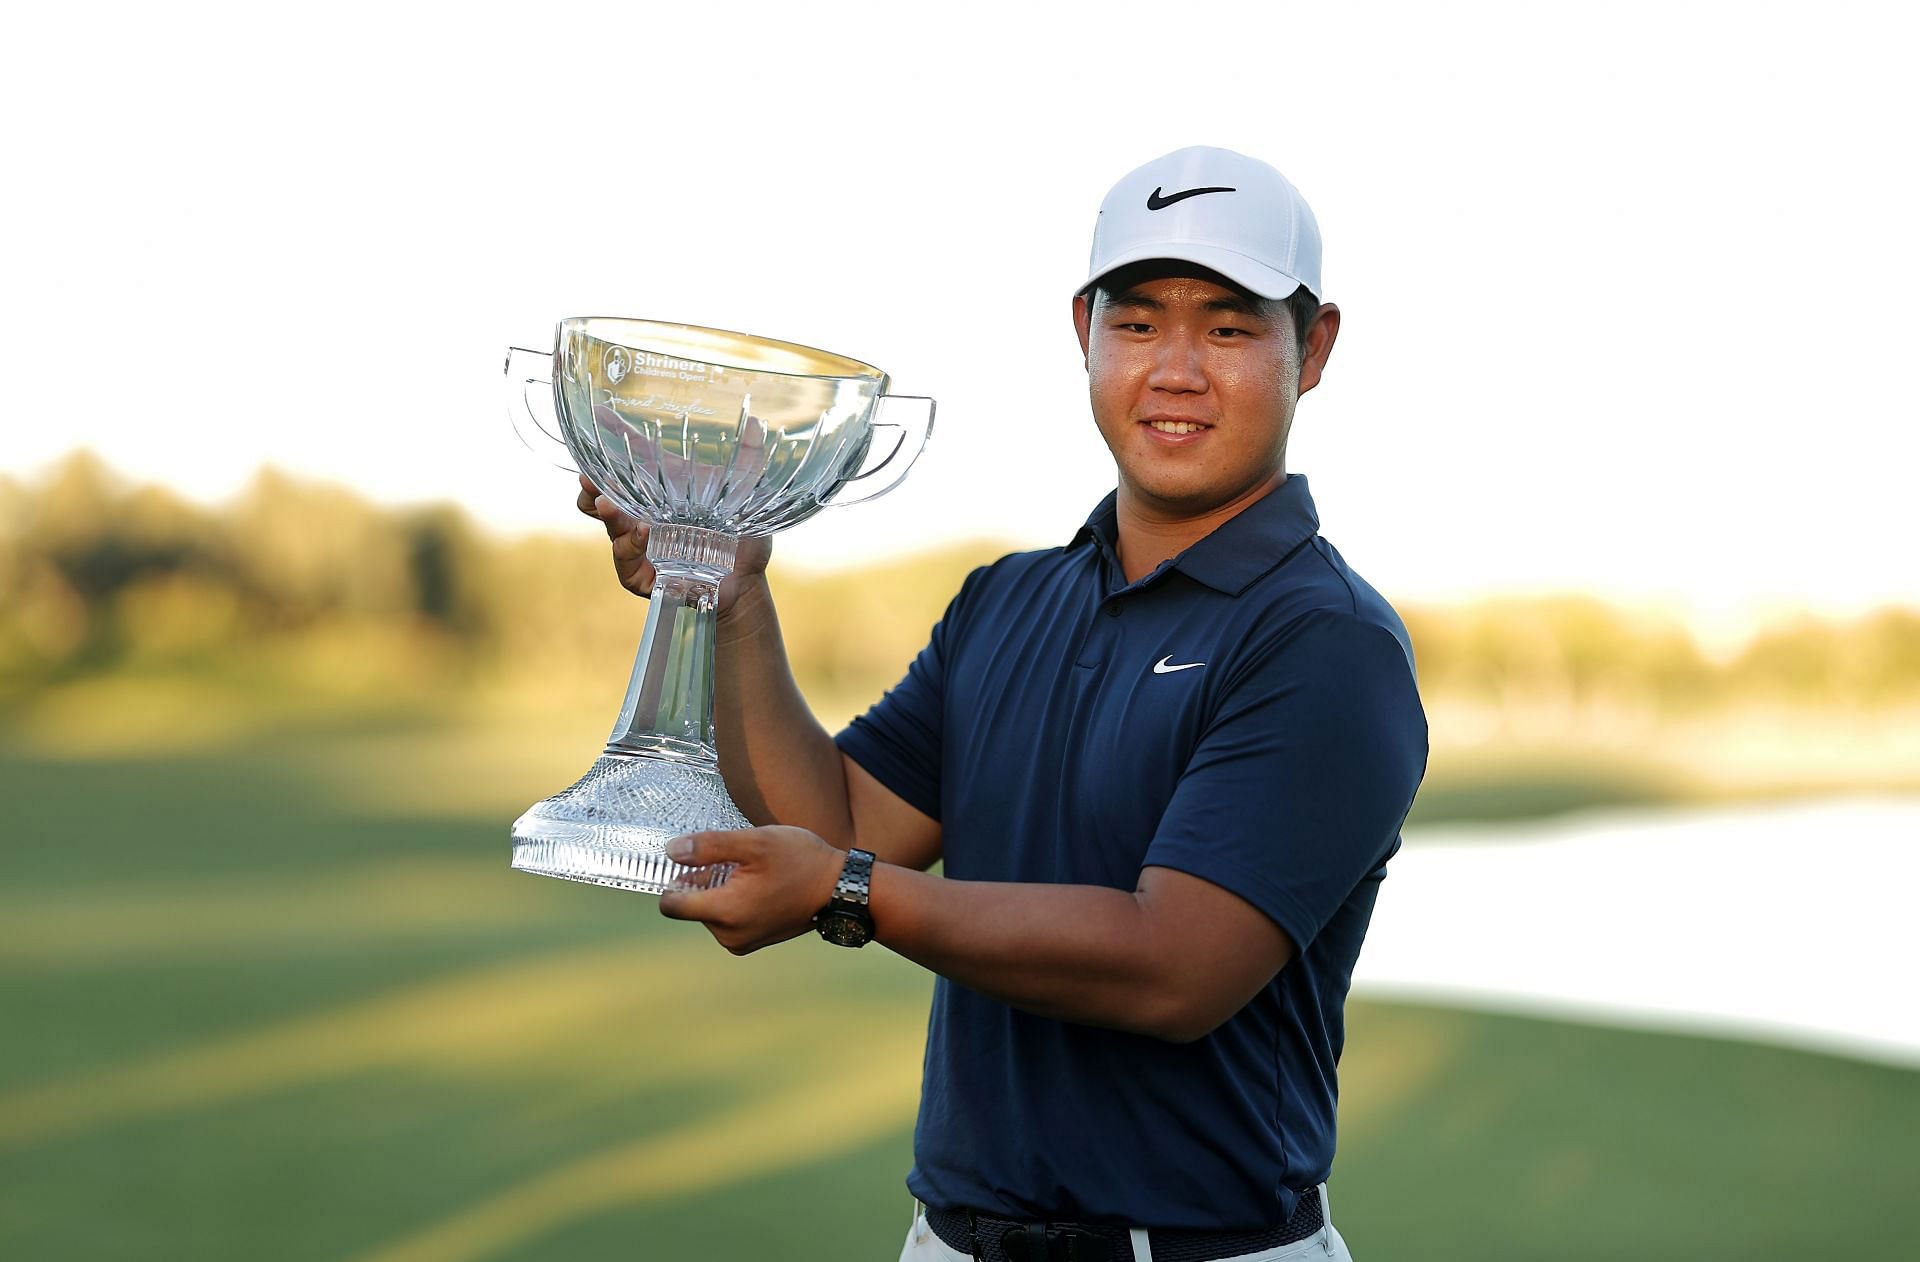 How much did Tom Kim win at the 2023 Shriners Children's Open